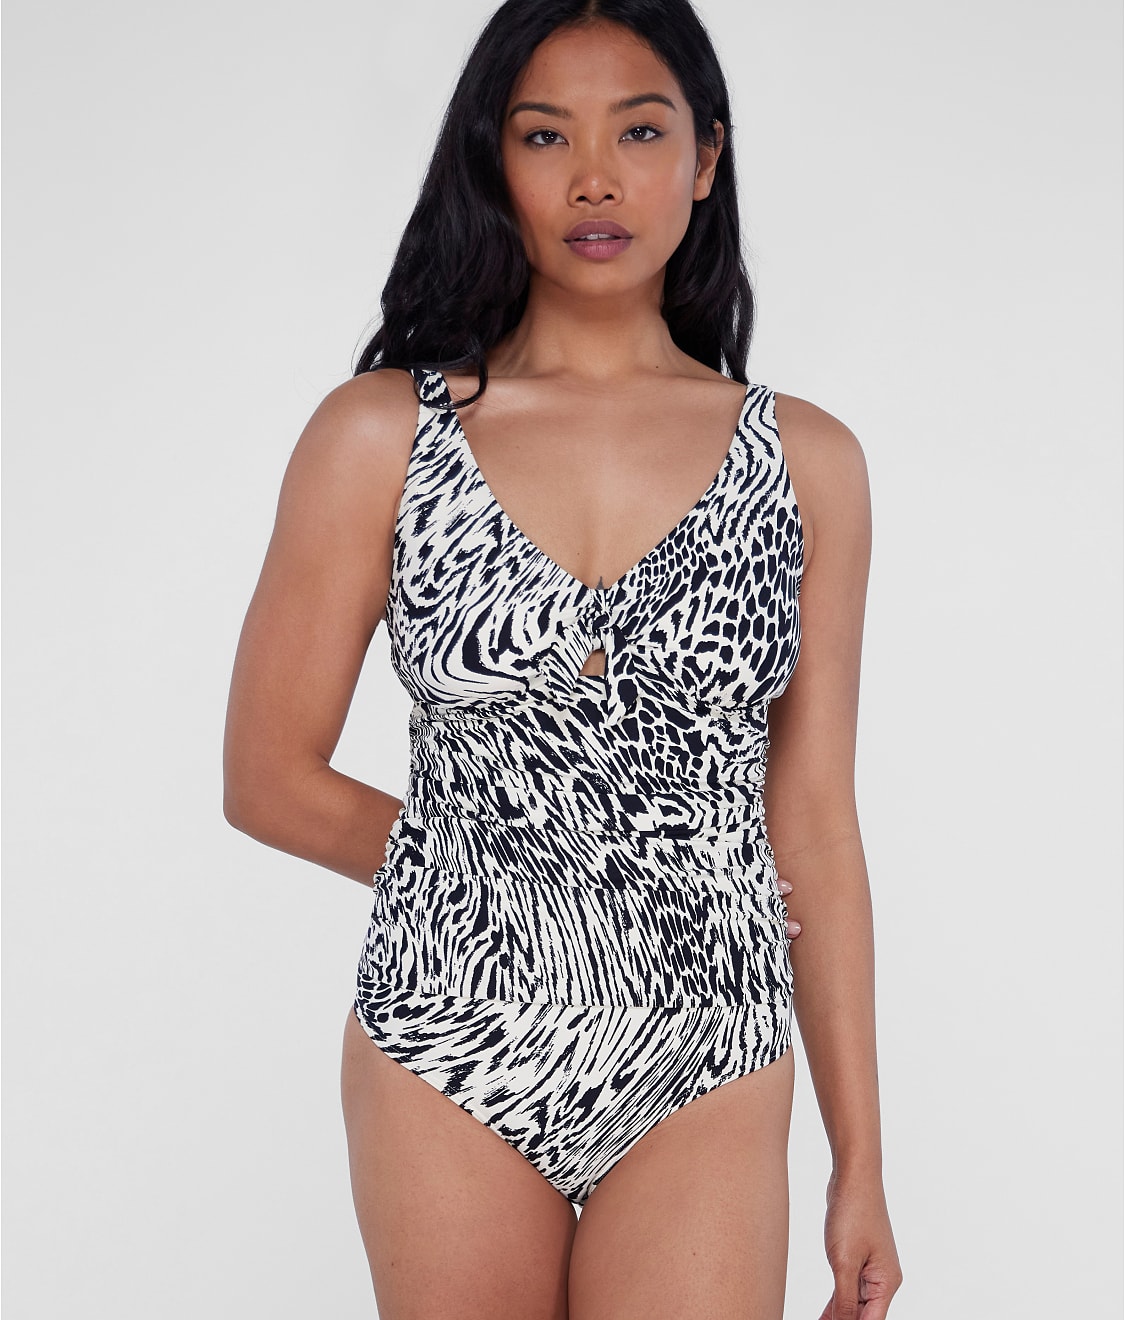 RED LEOPARD HIGH NECK CHEEKY BODYSUIT SIZE UK 6/US 2 SAMPLE SALE